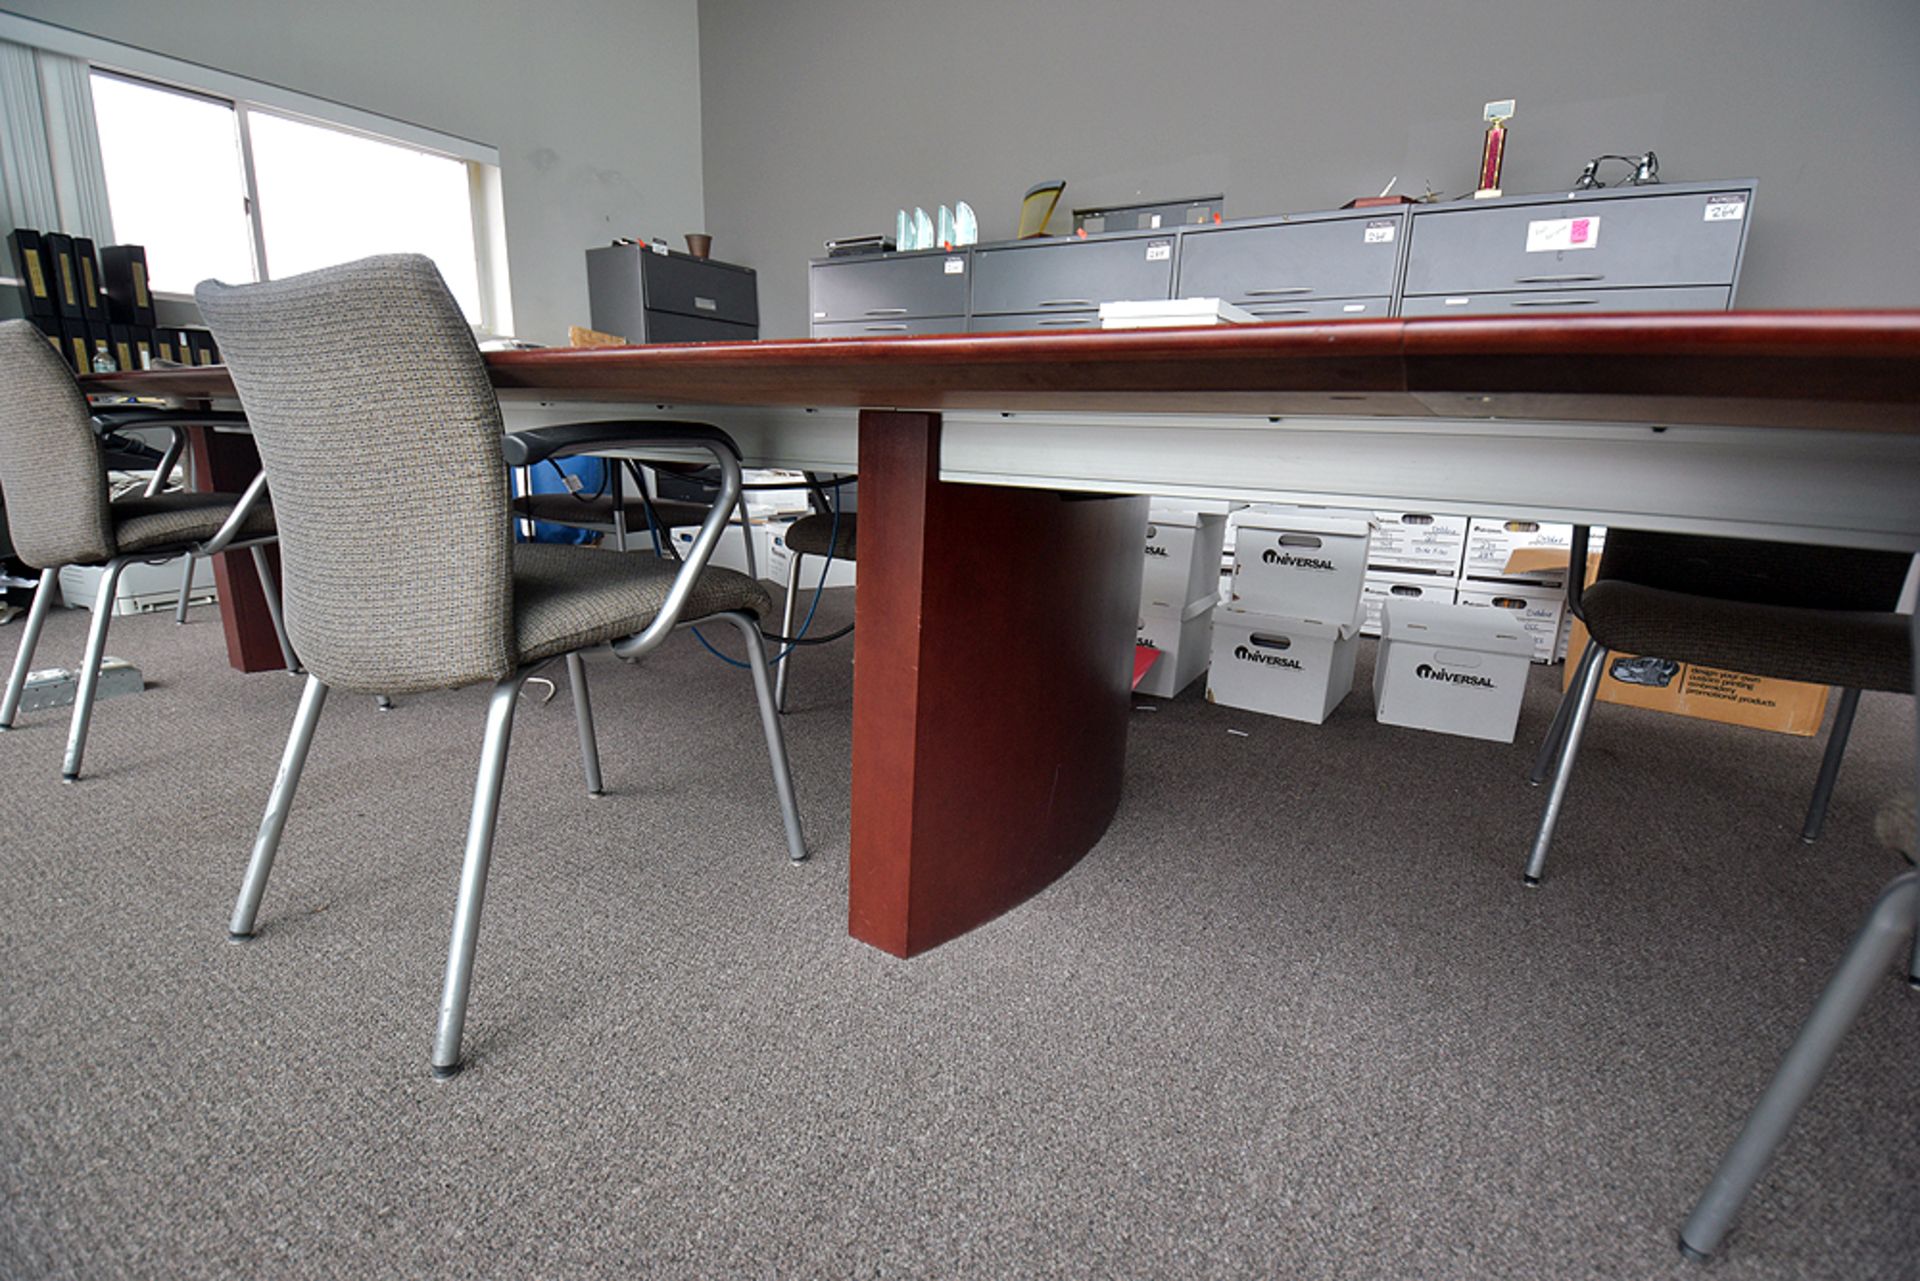 Executive Wood Conference Table (18'L. x 54"W. x 29"H) w/ (8) Ass't Chairs - Image 4 of 5